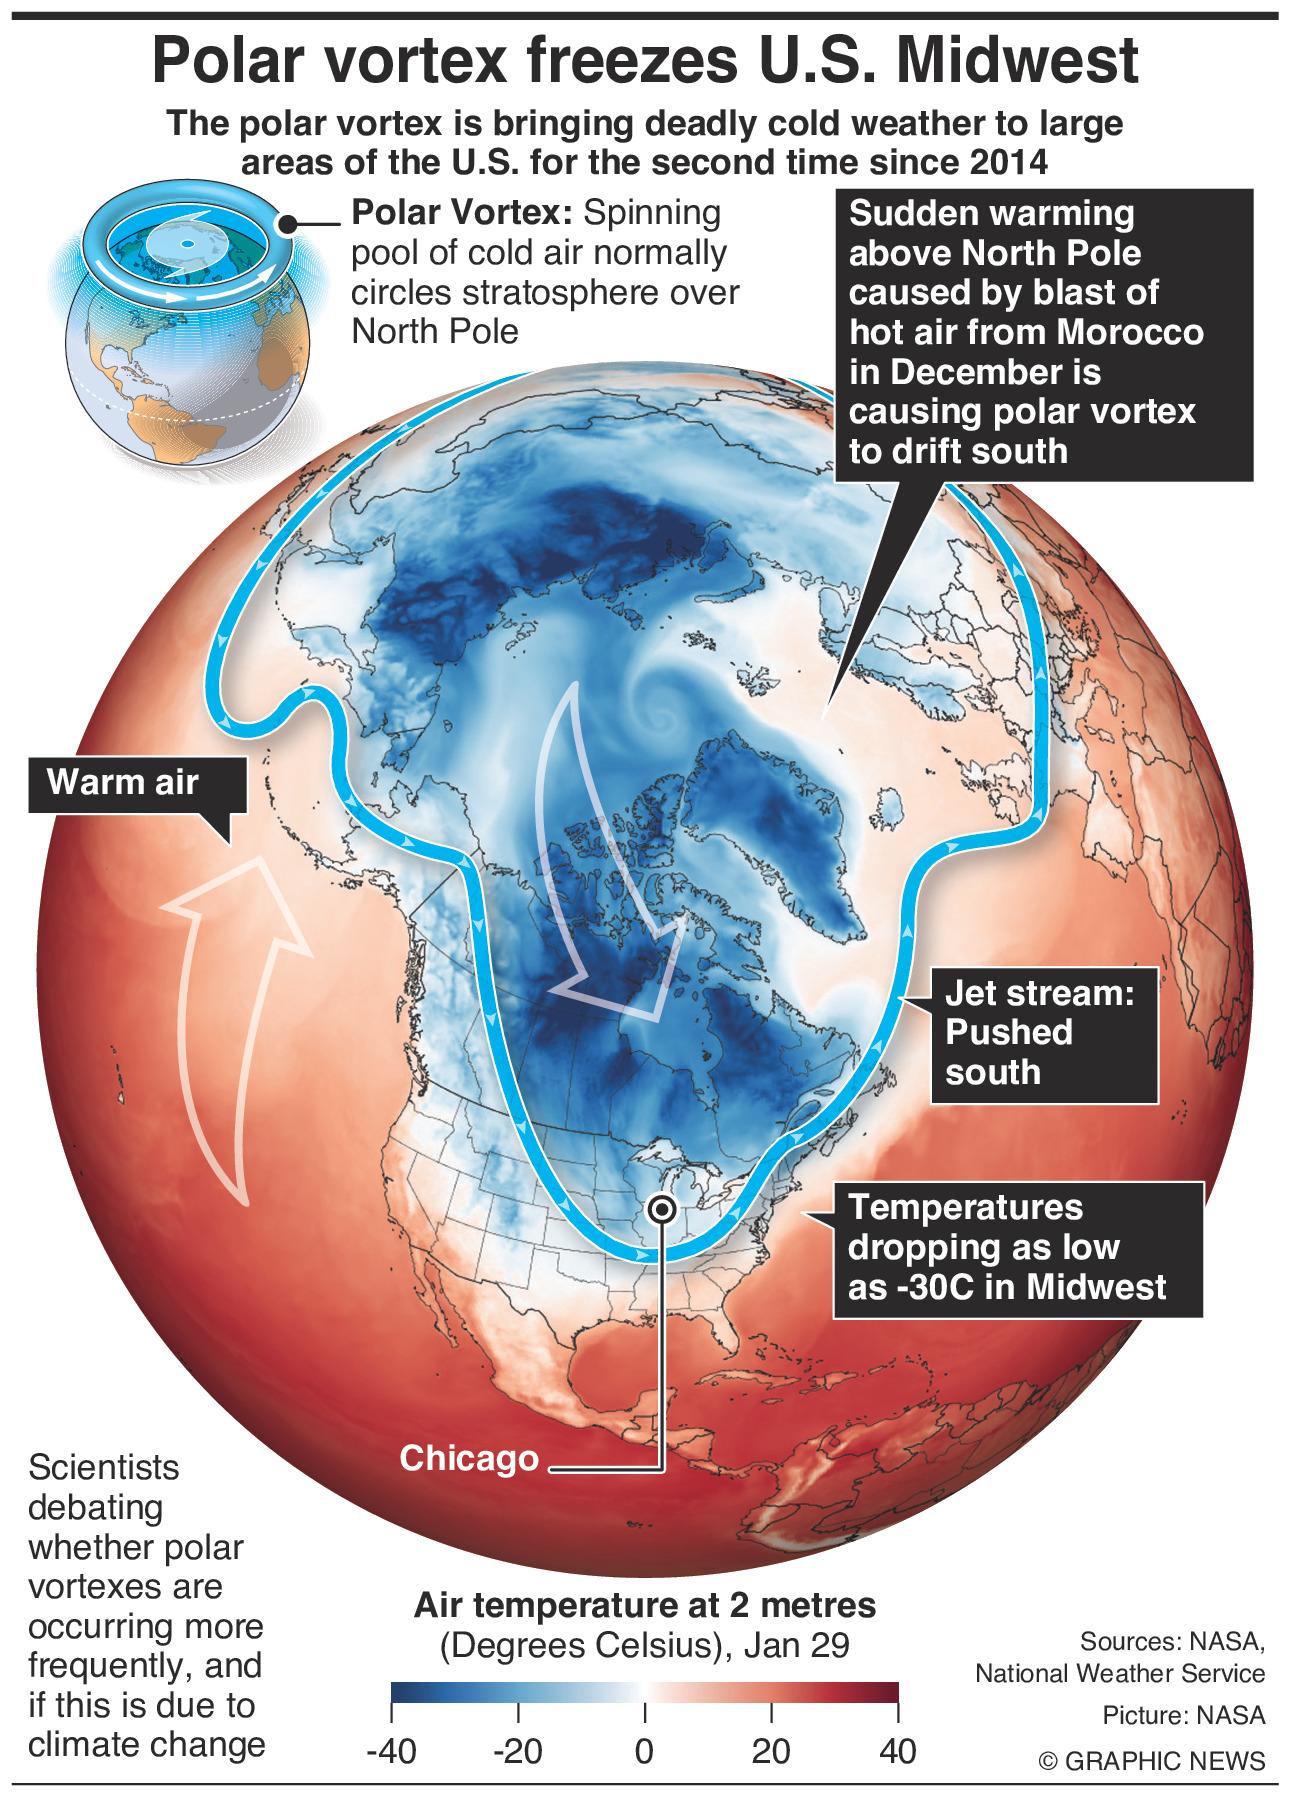 This is how a polar vortex forms (Graphic News)